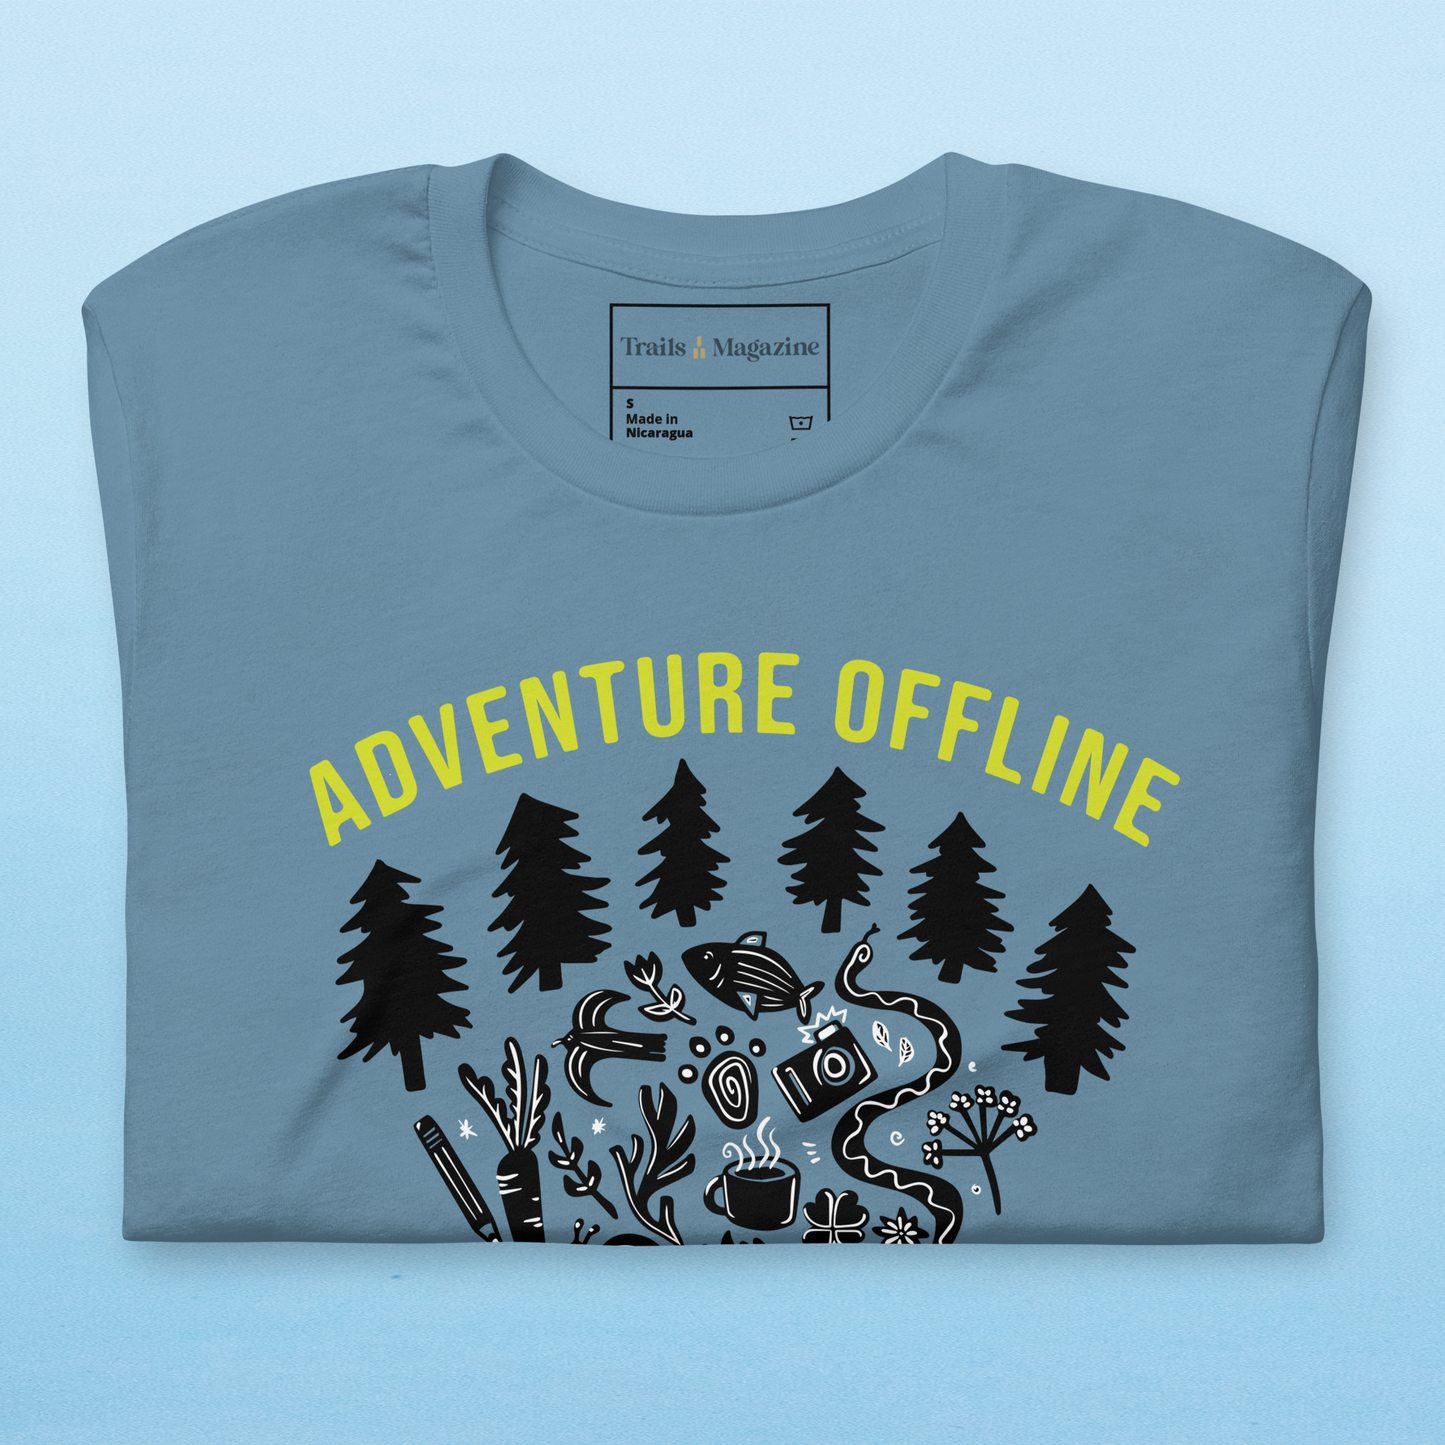 A blue T-shirt is folded over a light blue backdrop. in a neon green, the text "Adventure Offline" arches over a black illustration of pine trees and a collection of items including carrots, flowers, fish, a camera, a snake, coffee cup, and paw print are bundled together. 